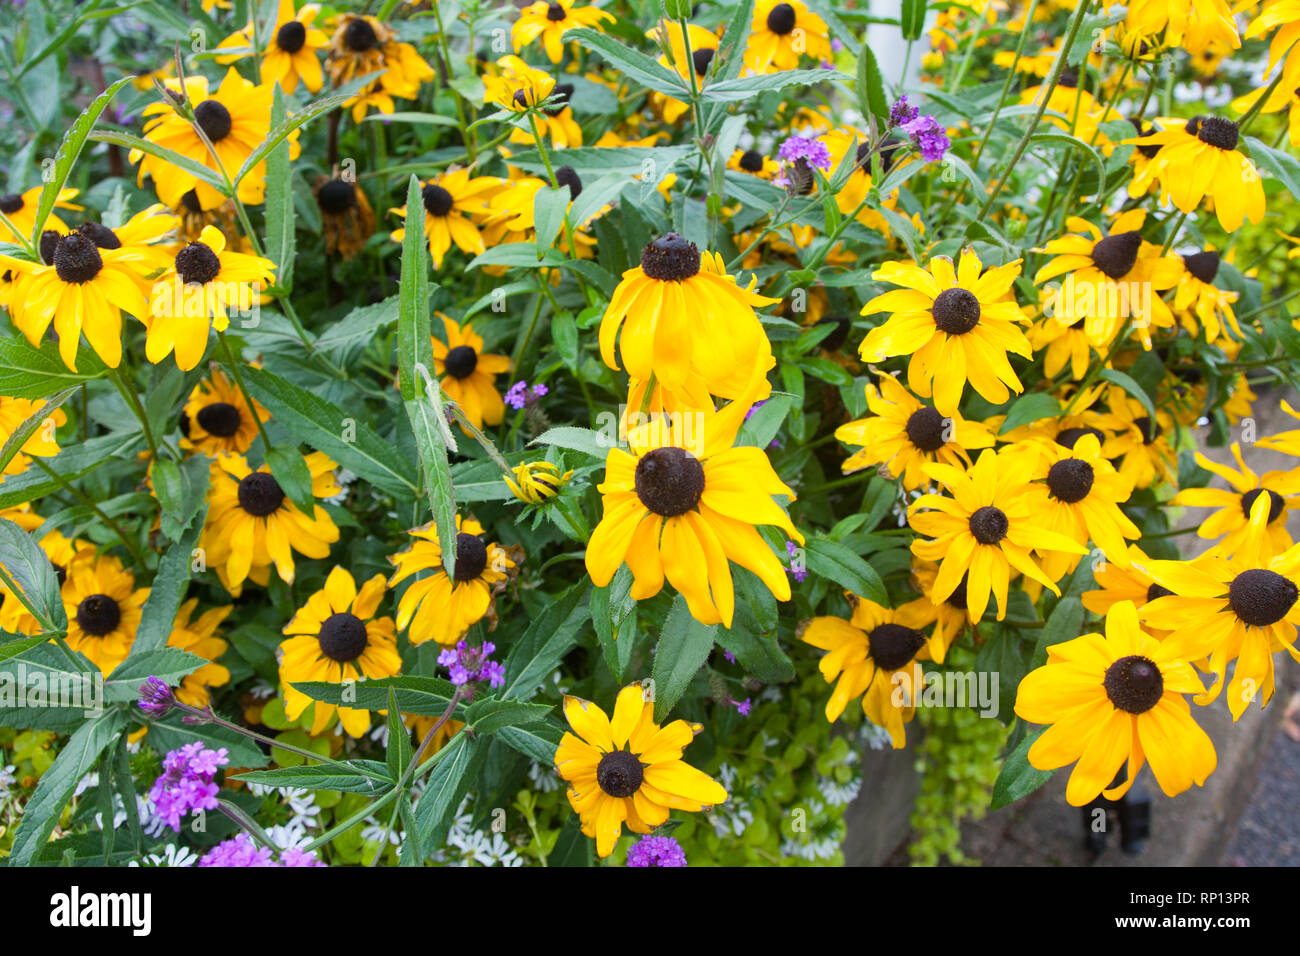 Bright yellow Rudbeckia Fulgida cone flowers with dark brown capitula are blossoming in the garden at summer. Stock Photo